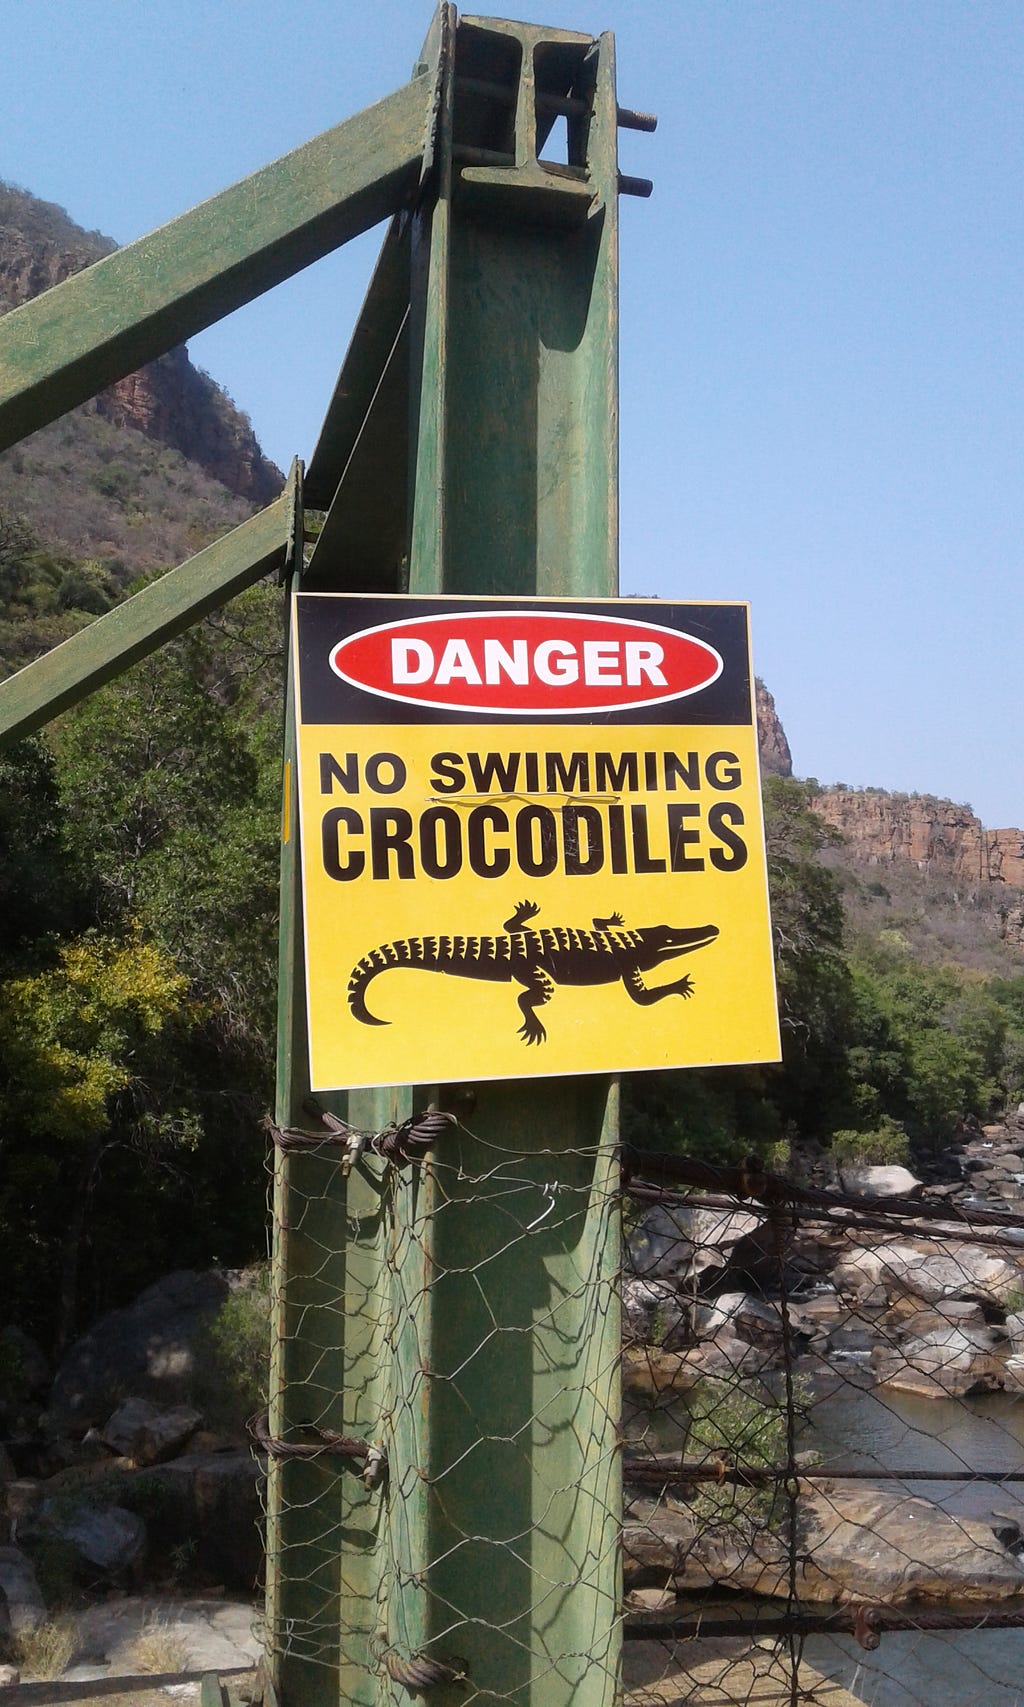 A crocodile danger sign warning hikers not to swim in the river